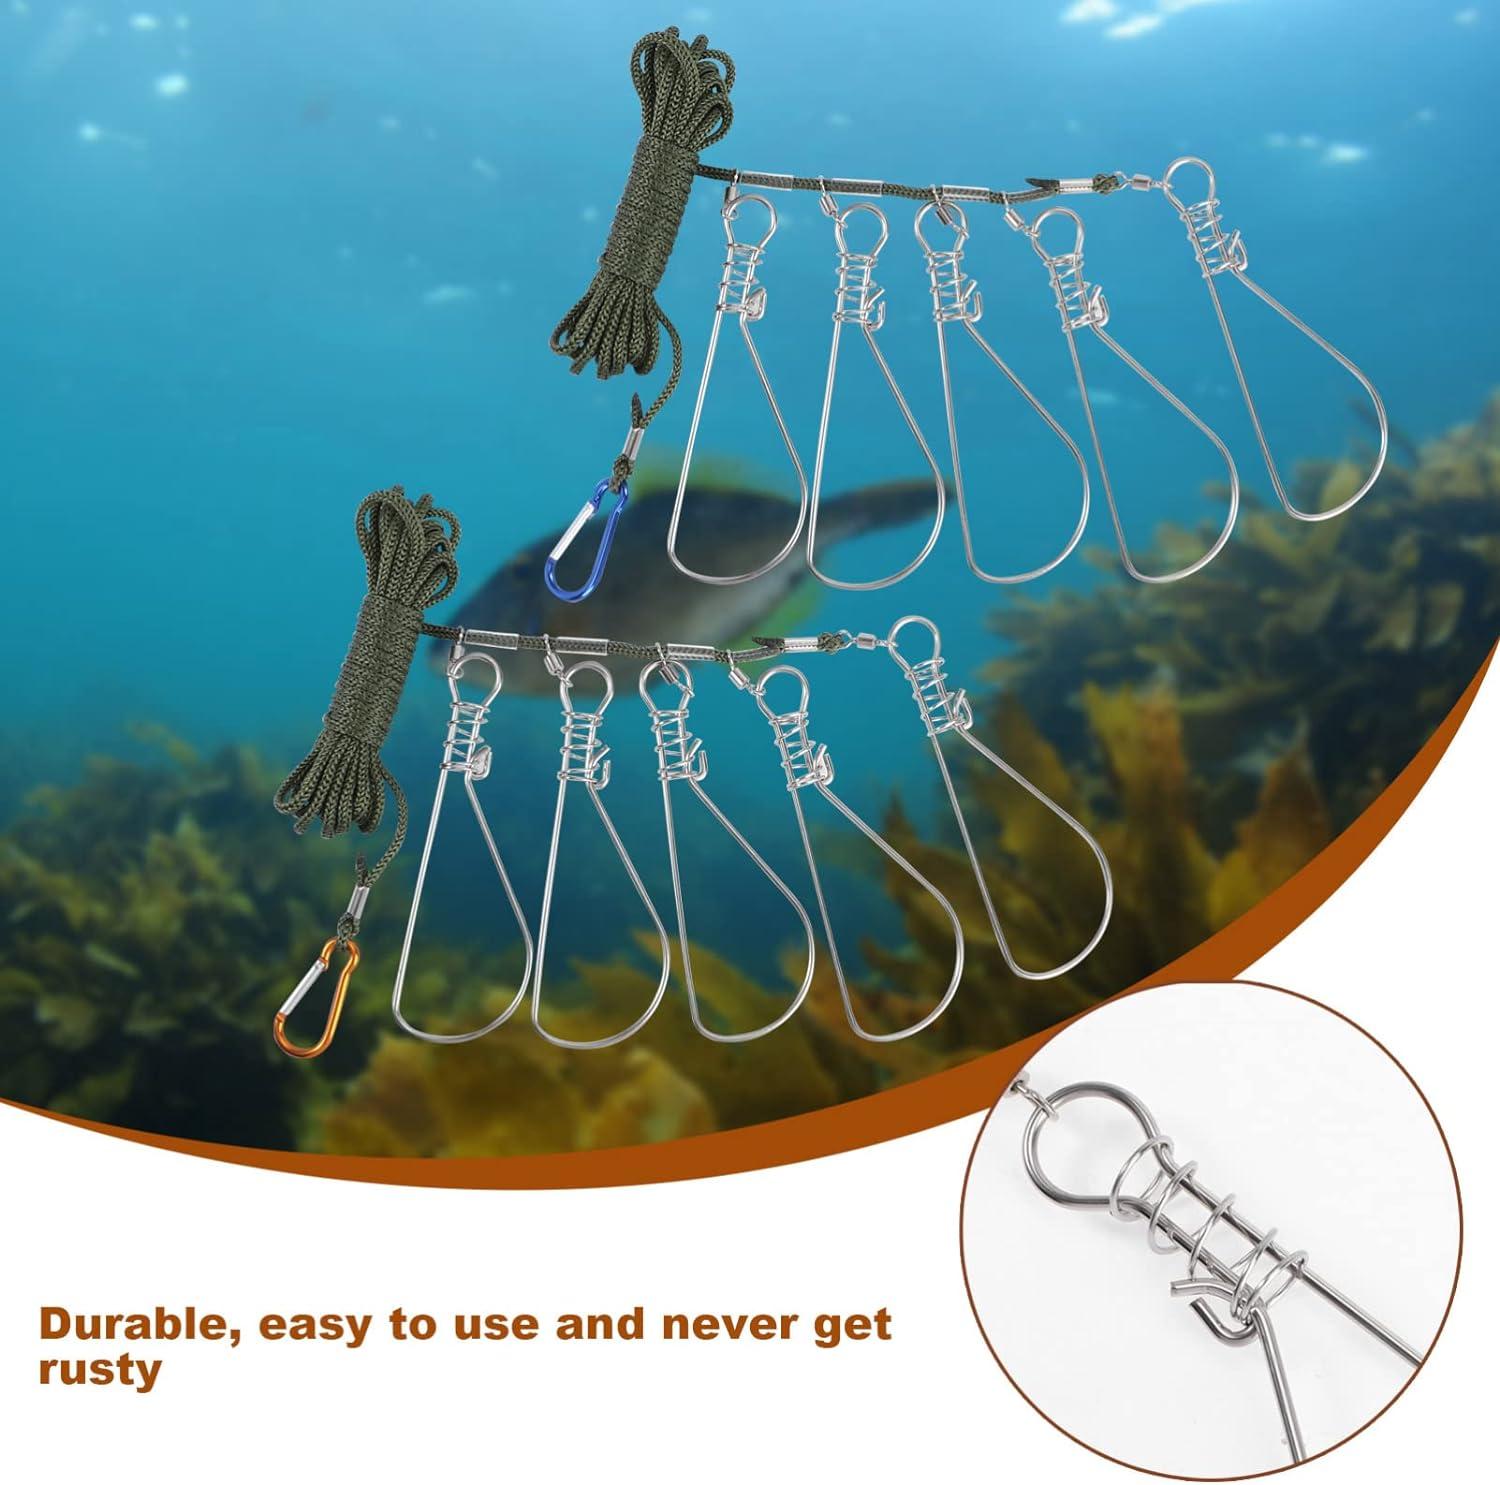 Qiilu Stainless Steel Heavy Duty Fishing Catch Stringer With 5 Lock Snaps Nylon Ropes Float,fishing Stringer,fishing Rope